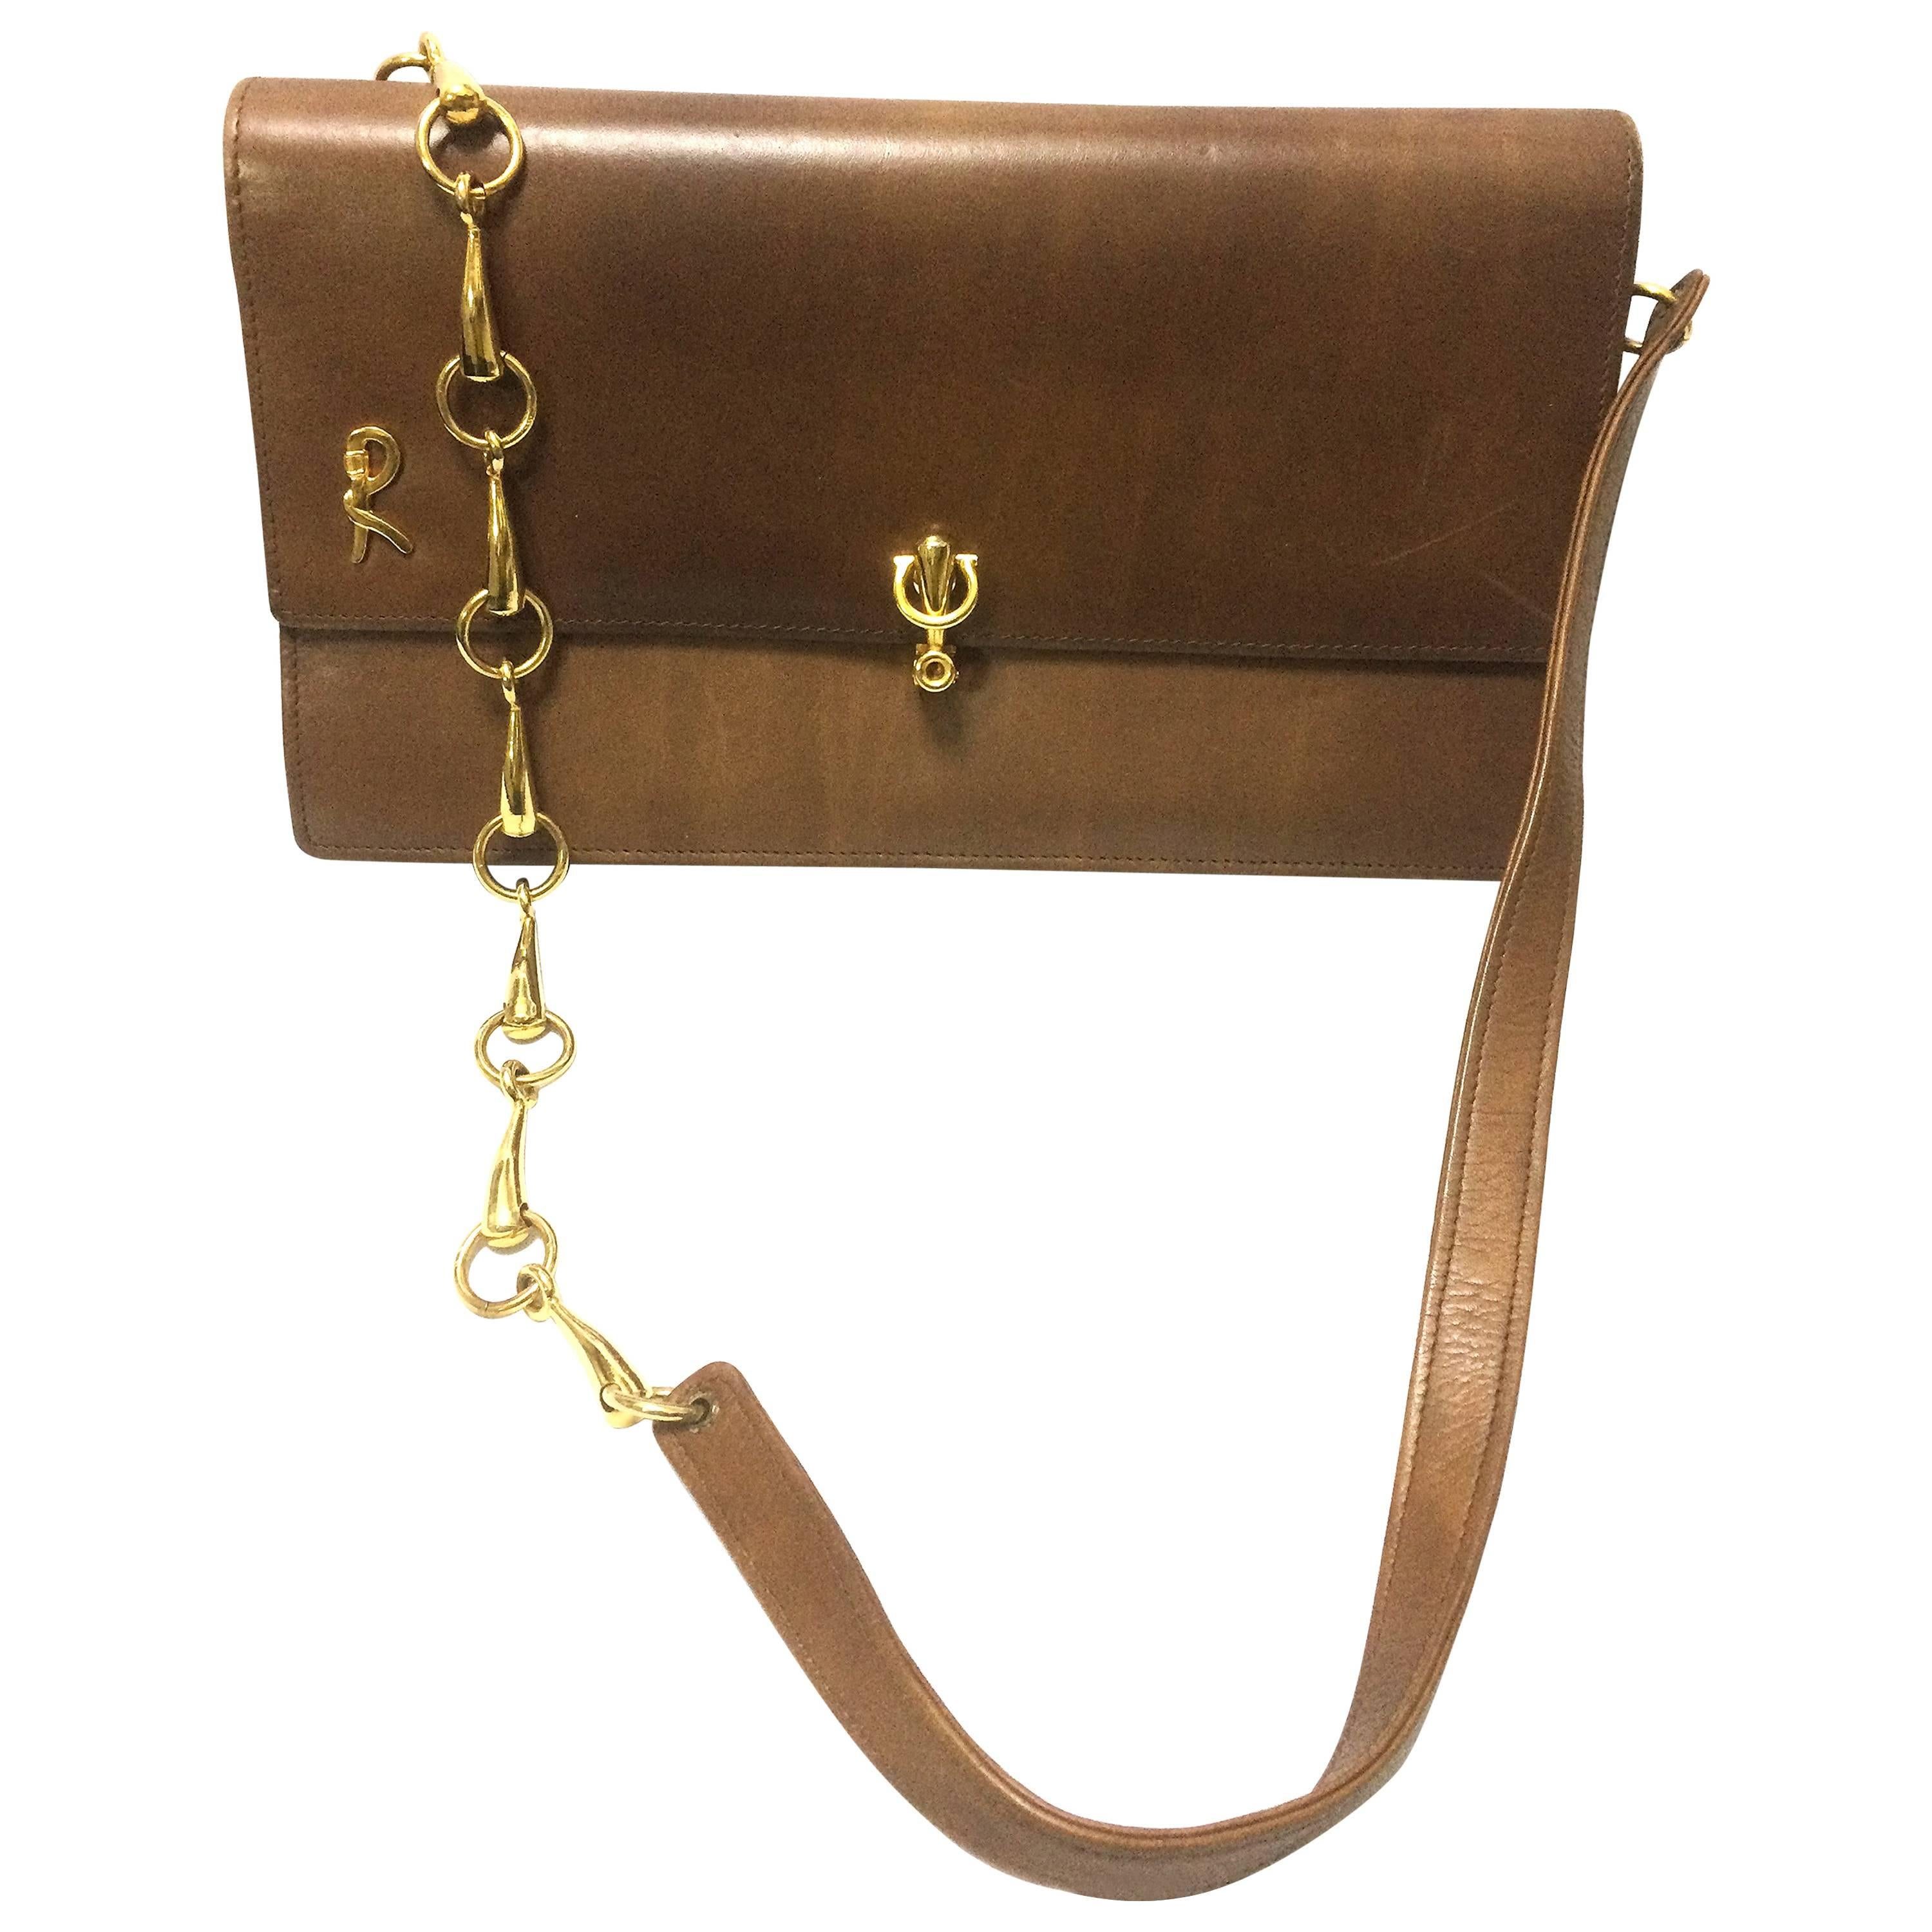 Vintage Roberta di Camerino brown leather chain shoulder bag with golden R logo  For Sale